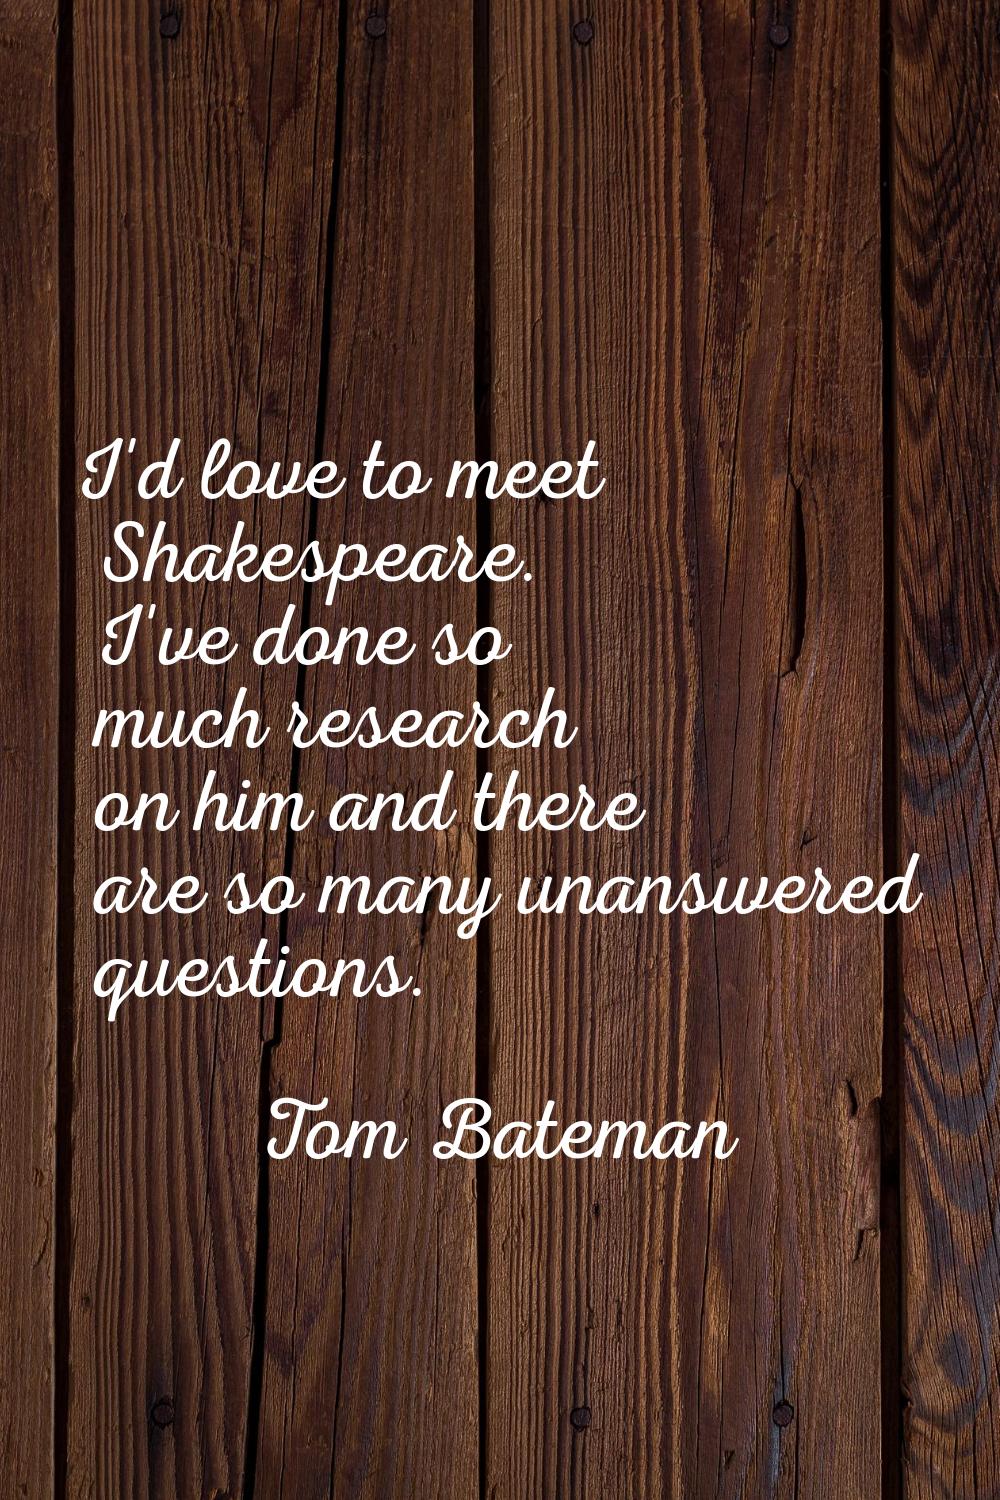 I'd love to meet Shakespeare. I've done so much research on him and there are so many unanswered qu